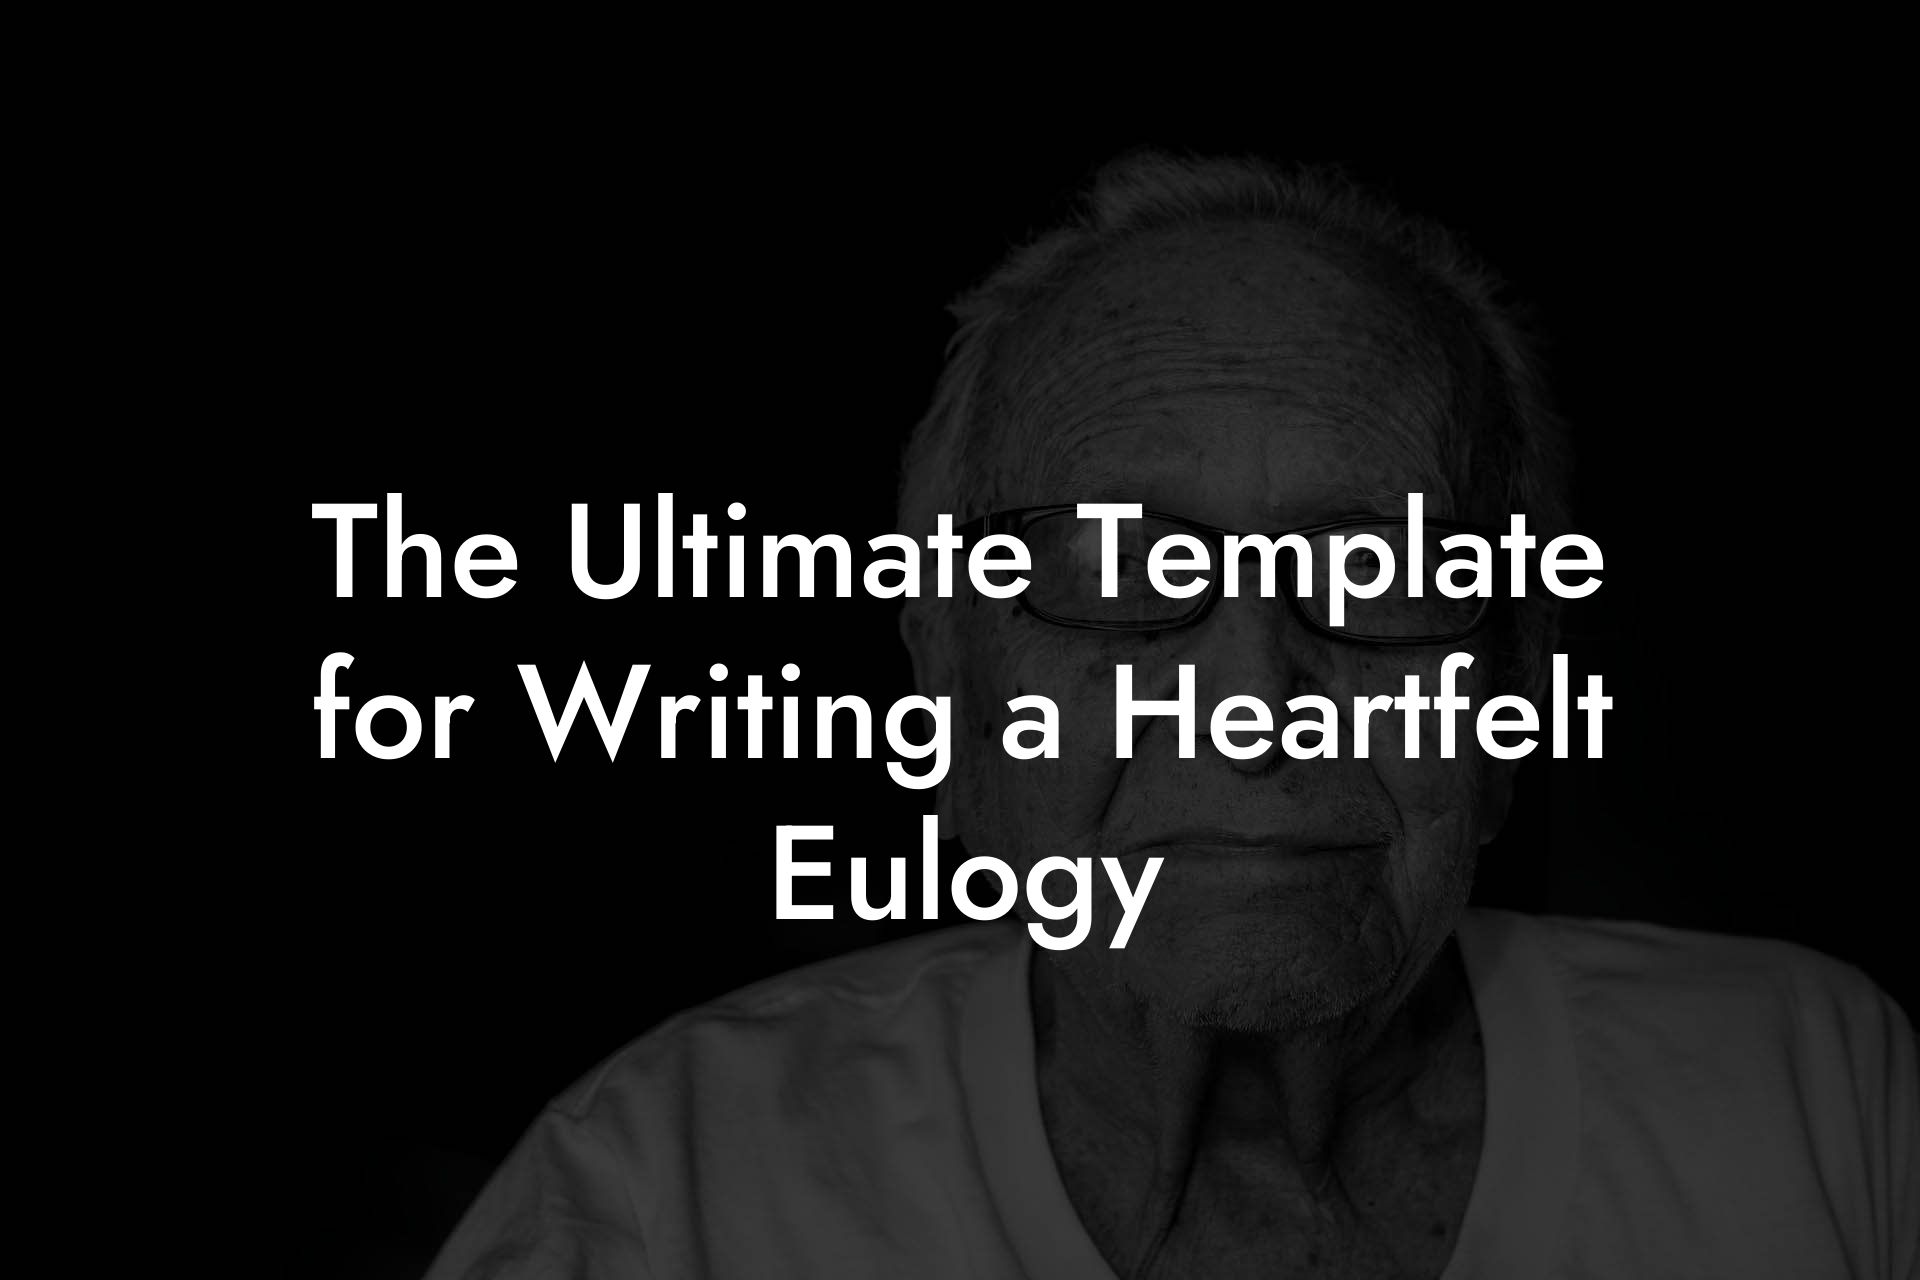 The Ultimate Template for Writing a Heartfelt Eulogy